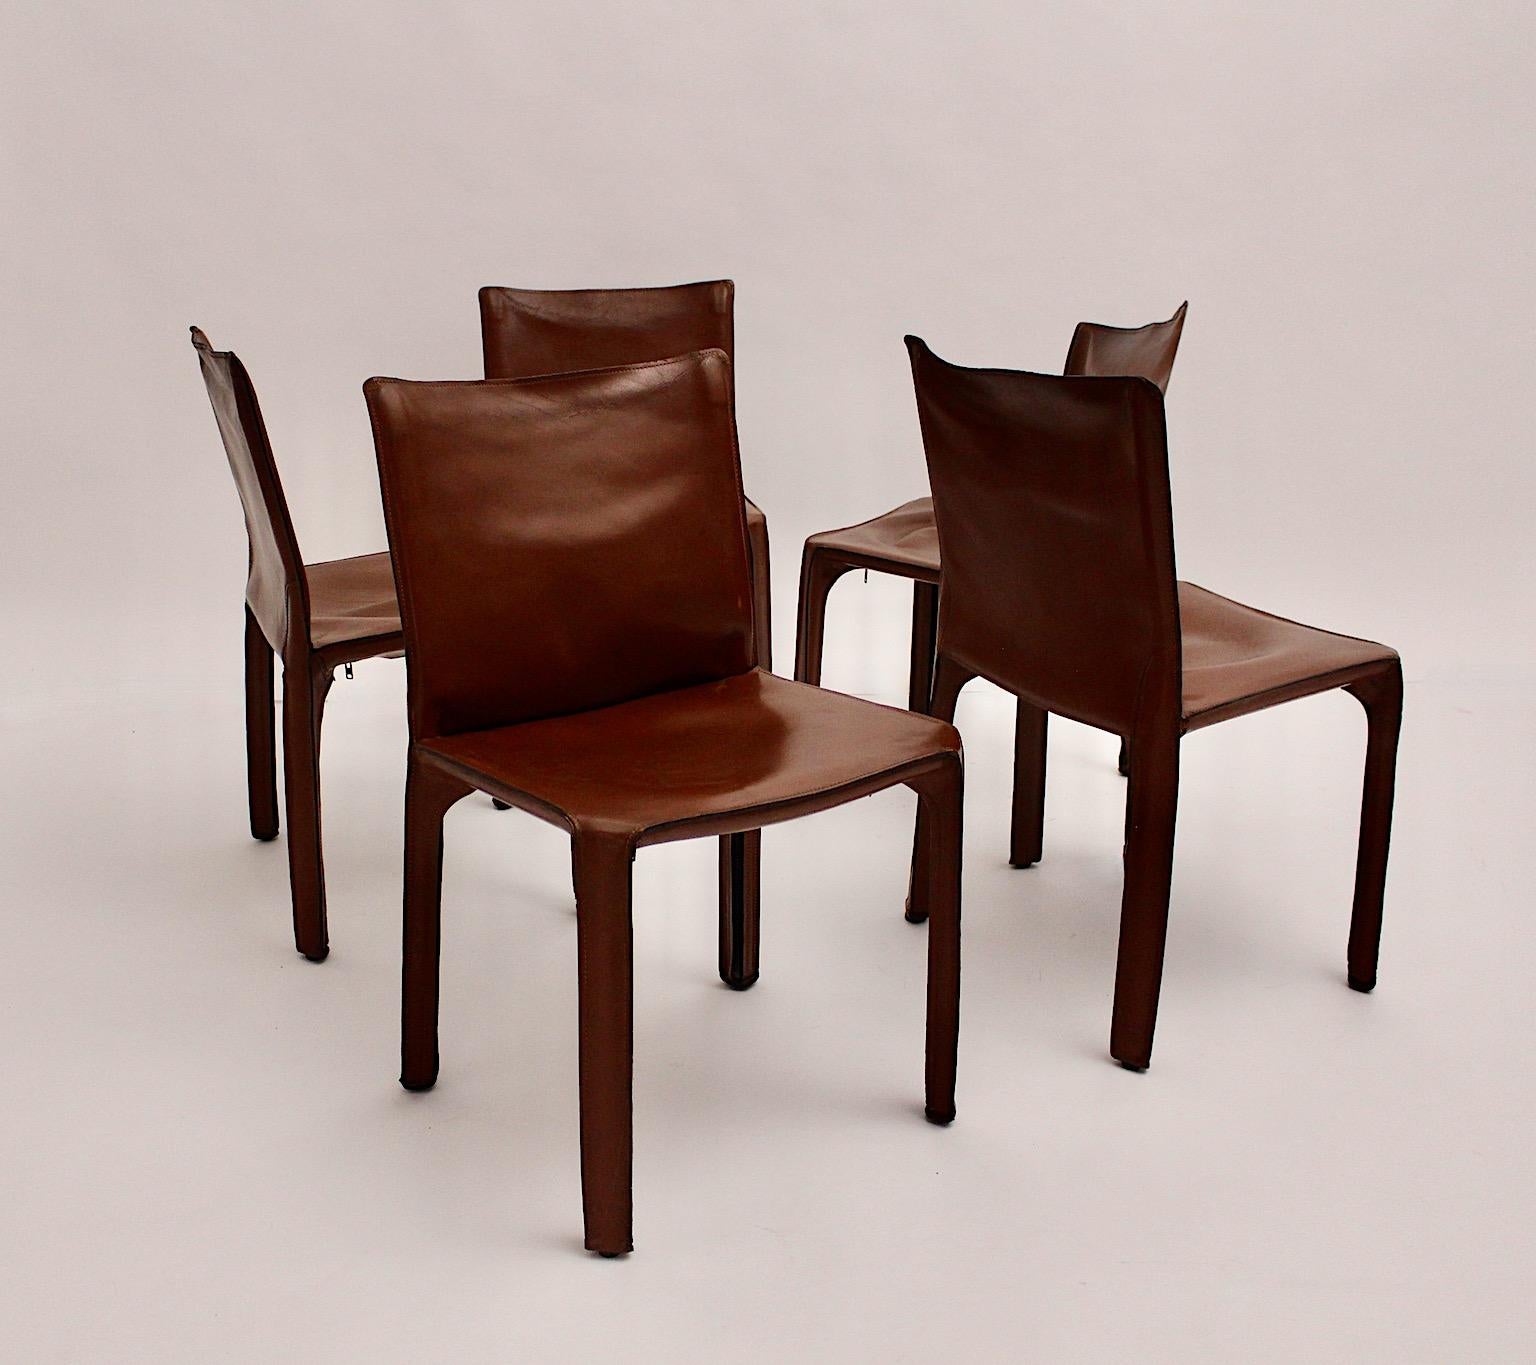 20th Century Modern Vintage Five Cognac Brown Leather CAB Dining Chairs Mario Bellini, Italy